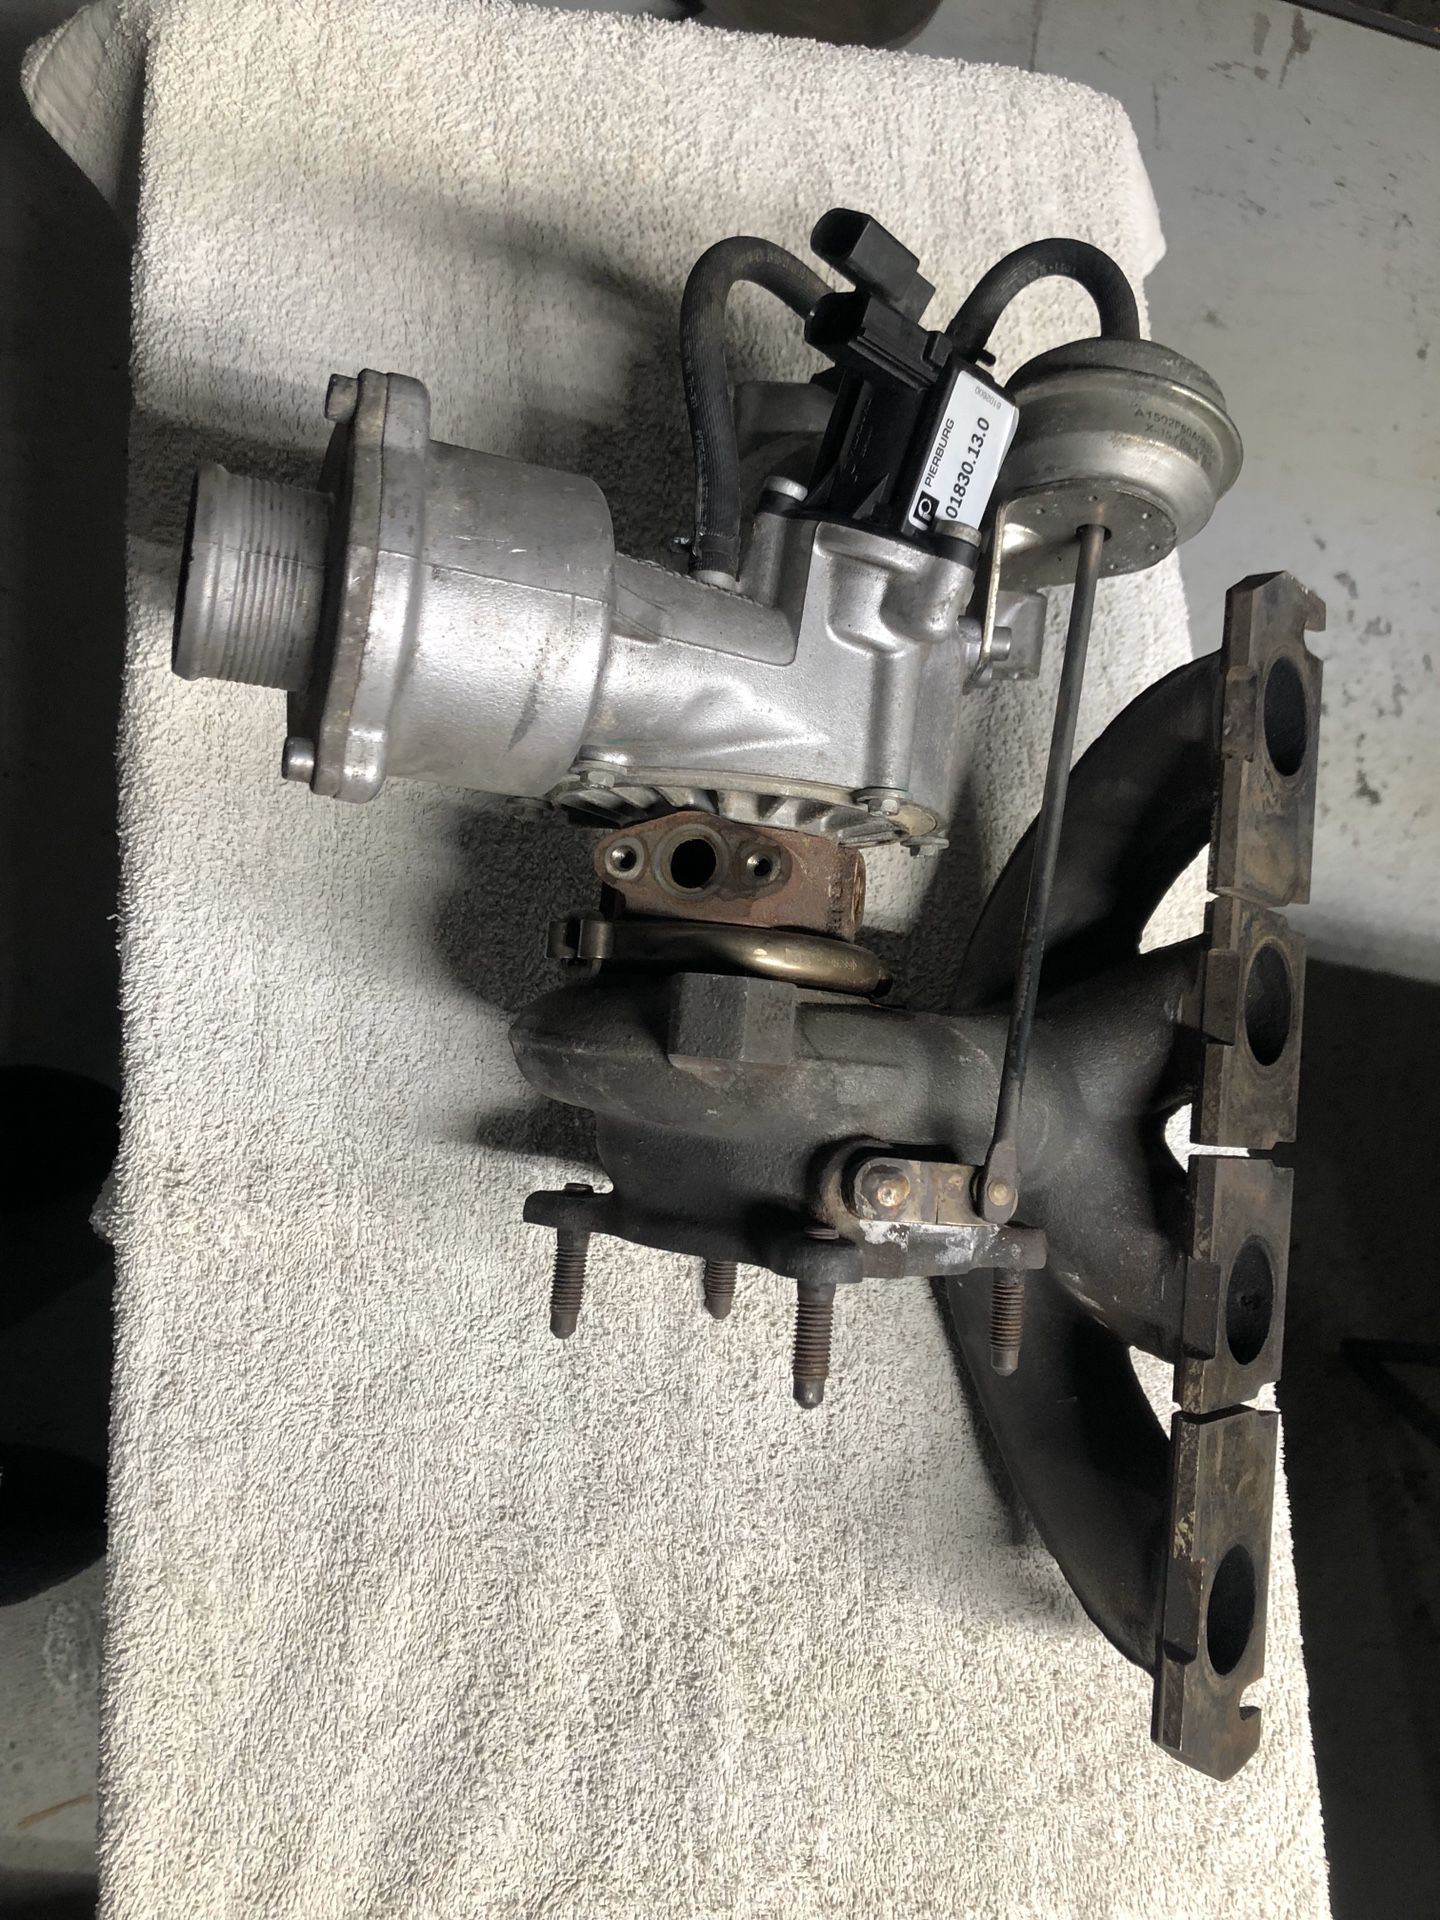 Audi A4 turbo charger (used parts)